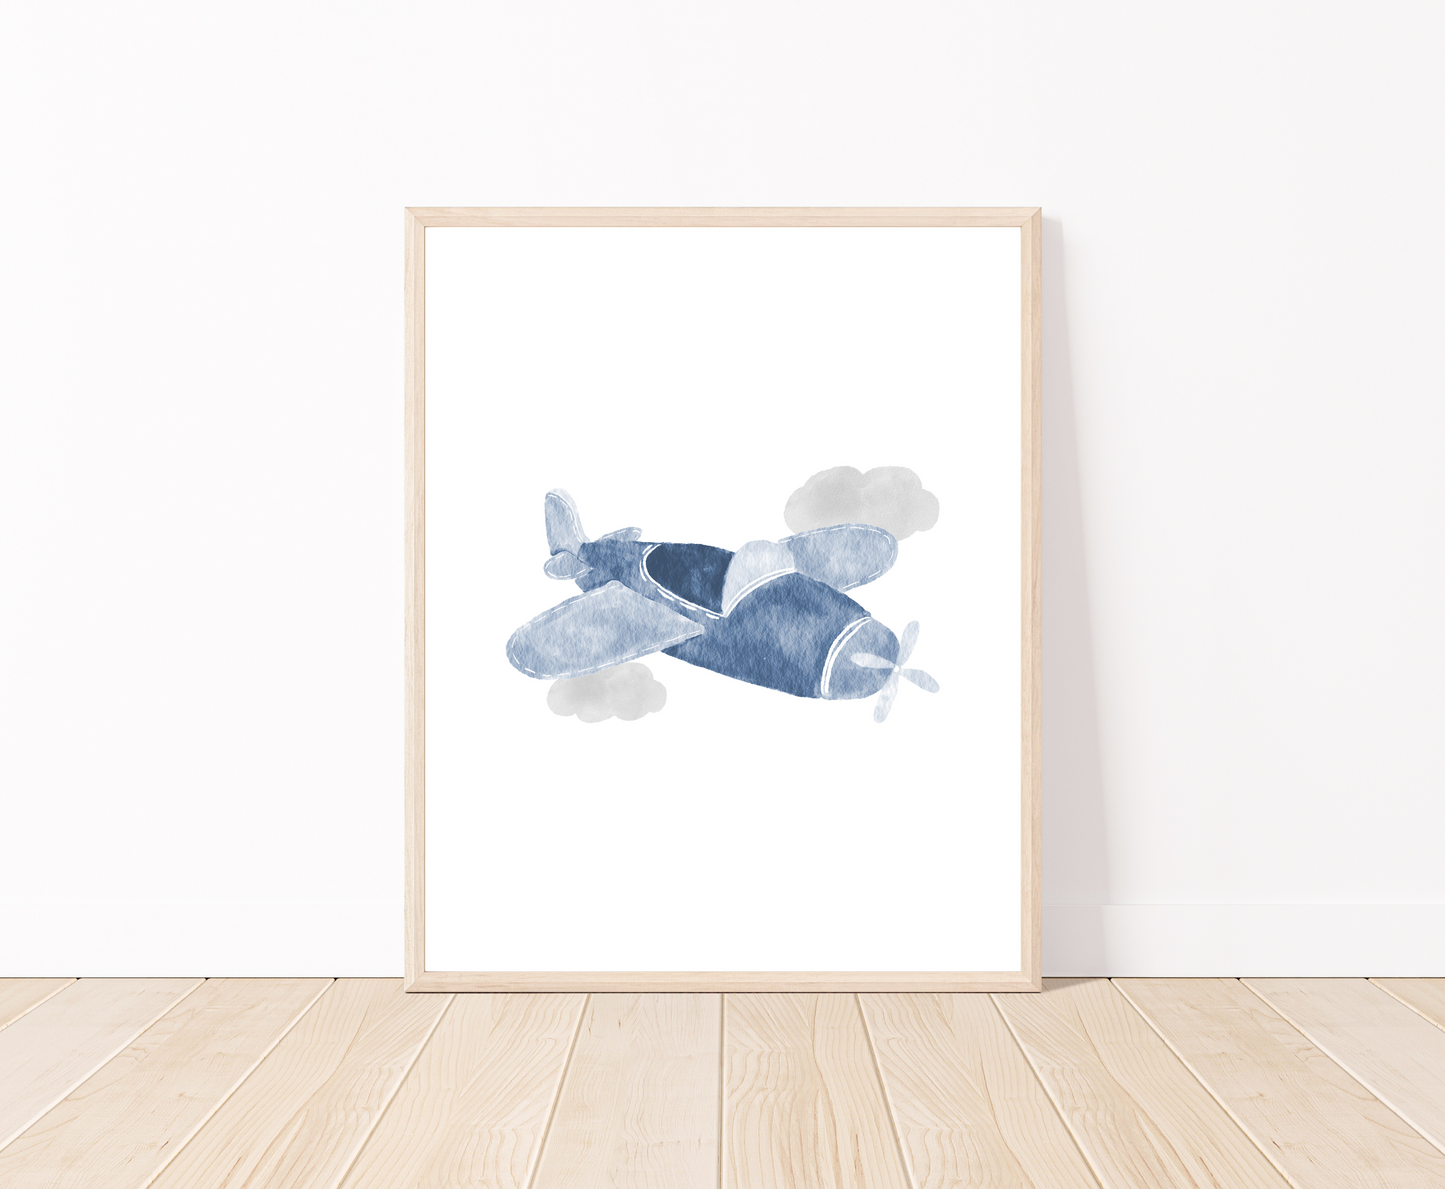 A digital poster is placed on a white wall and parquet flooring and shows a baby blue airplane and two gray clouds.